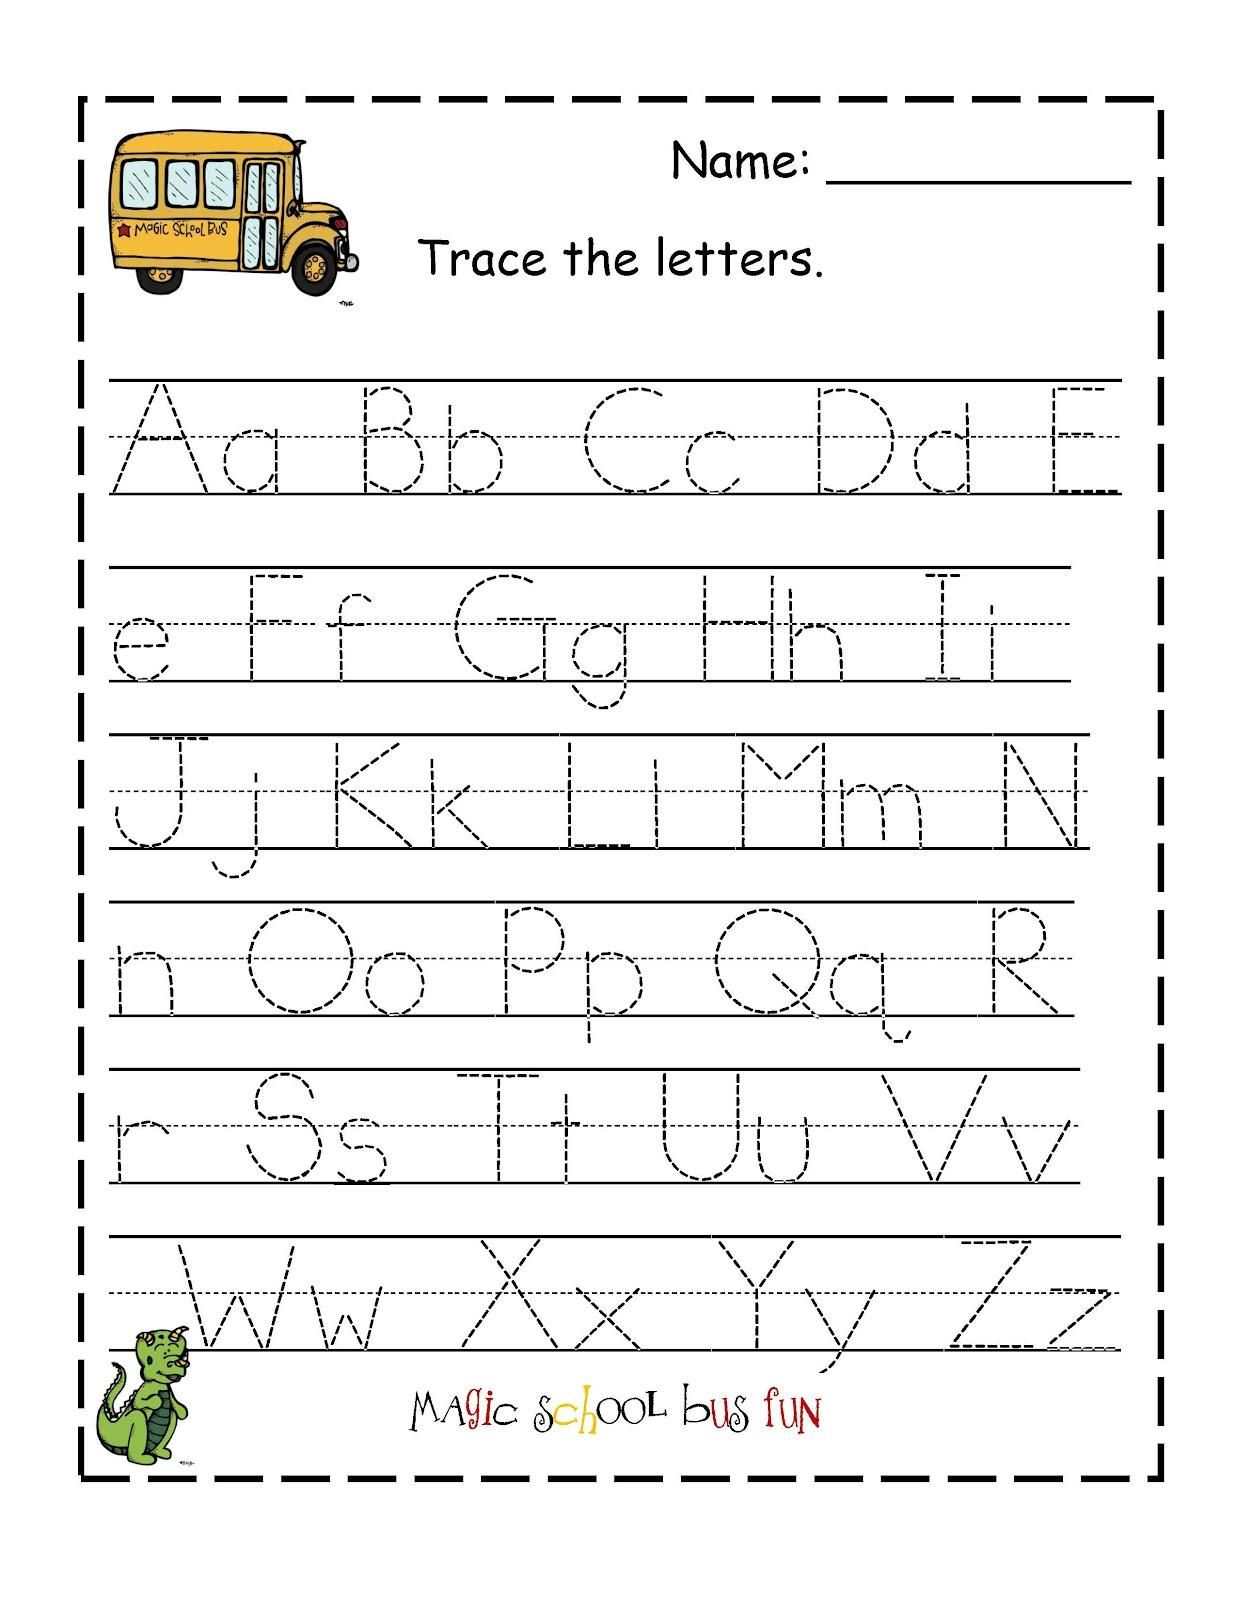 Free Printable Abc Tracing Worksheets #2 | Places To Visit - Free Printable Abc Worksheets